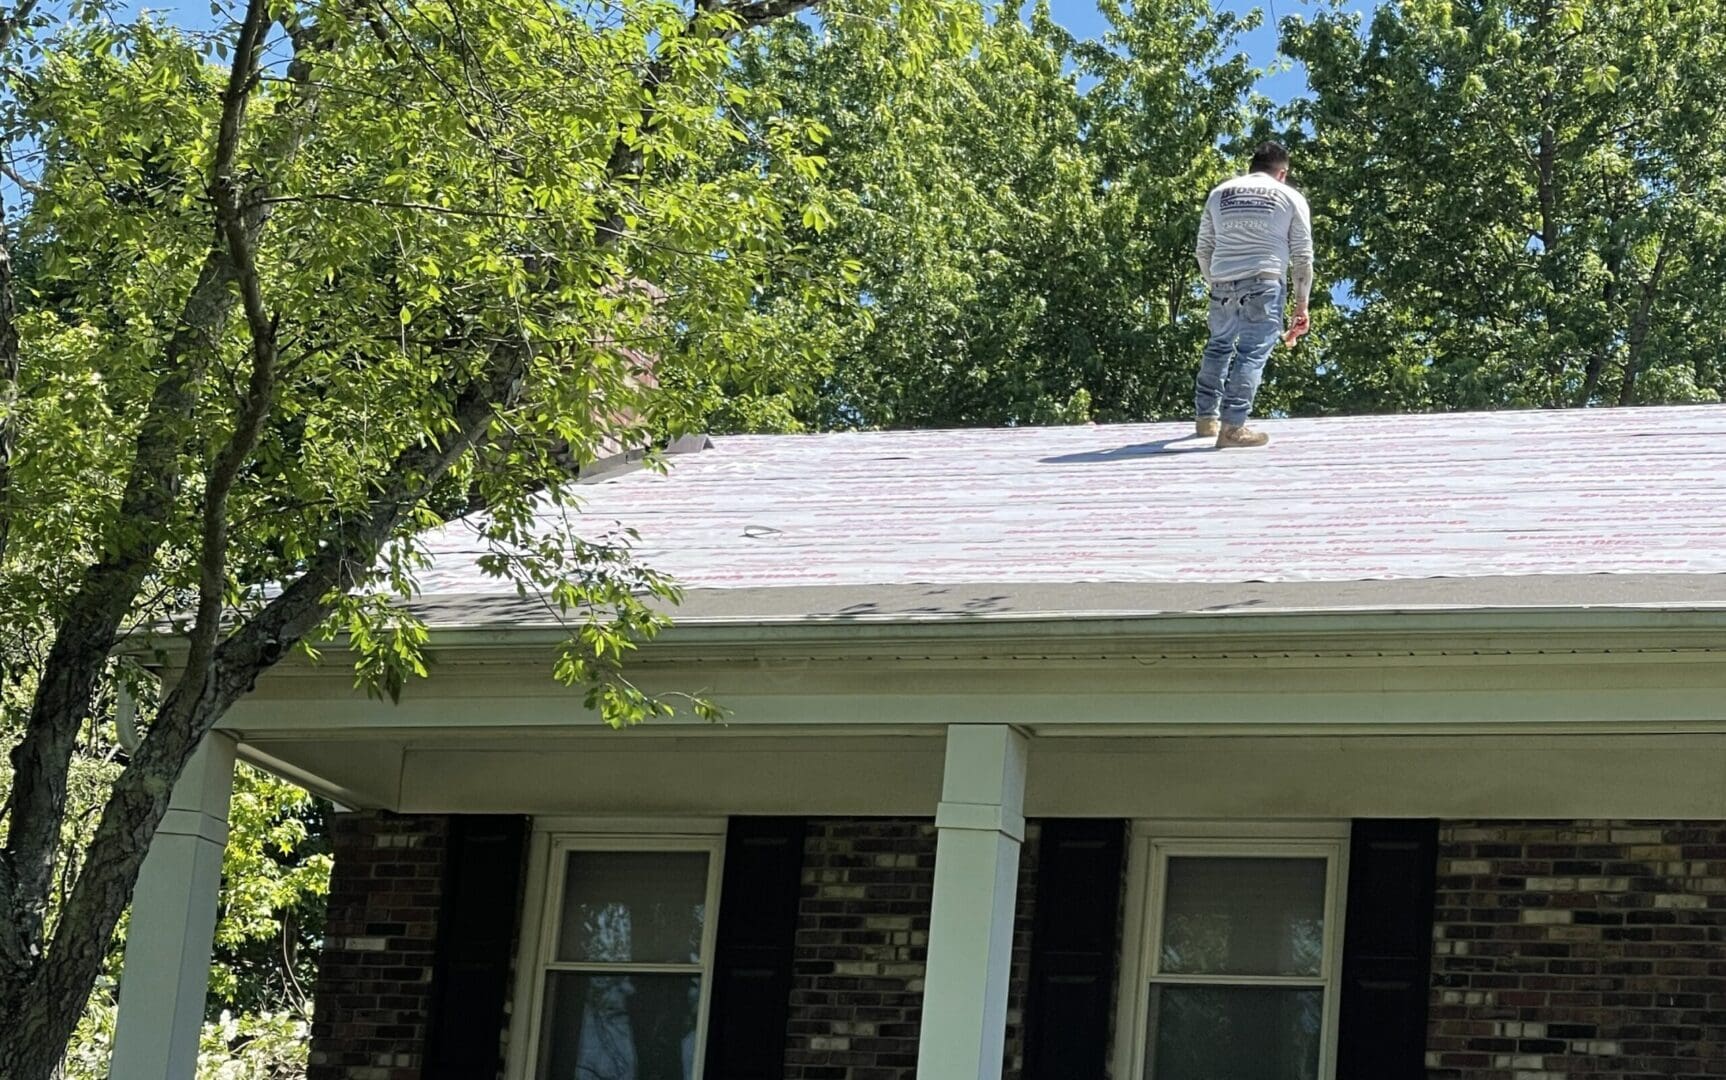 A man standing on the roof of a house.